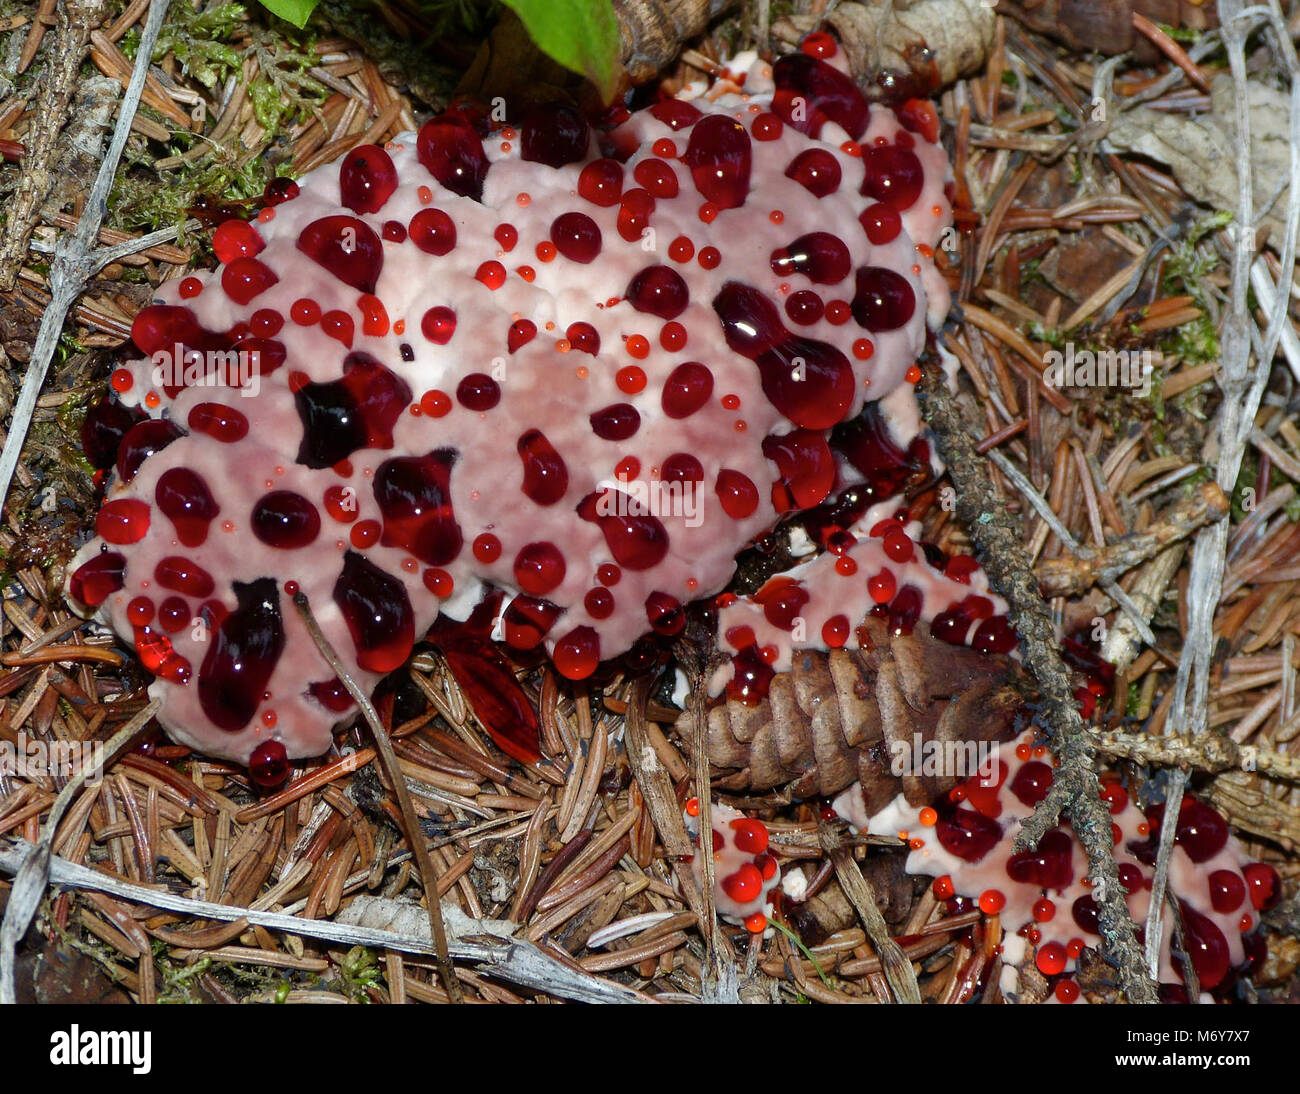 Bleeding Tooth Fungus (Hydnellum peckii)   . The bleeding tooth fungus, despite its disconcerting name, is not actually bleeding, but simply secretes a red-colored liquid, particularly in moist conditions. Stock Photo